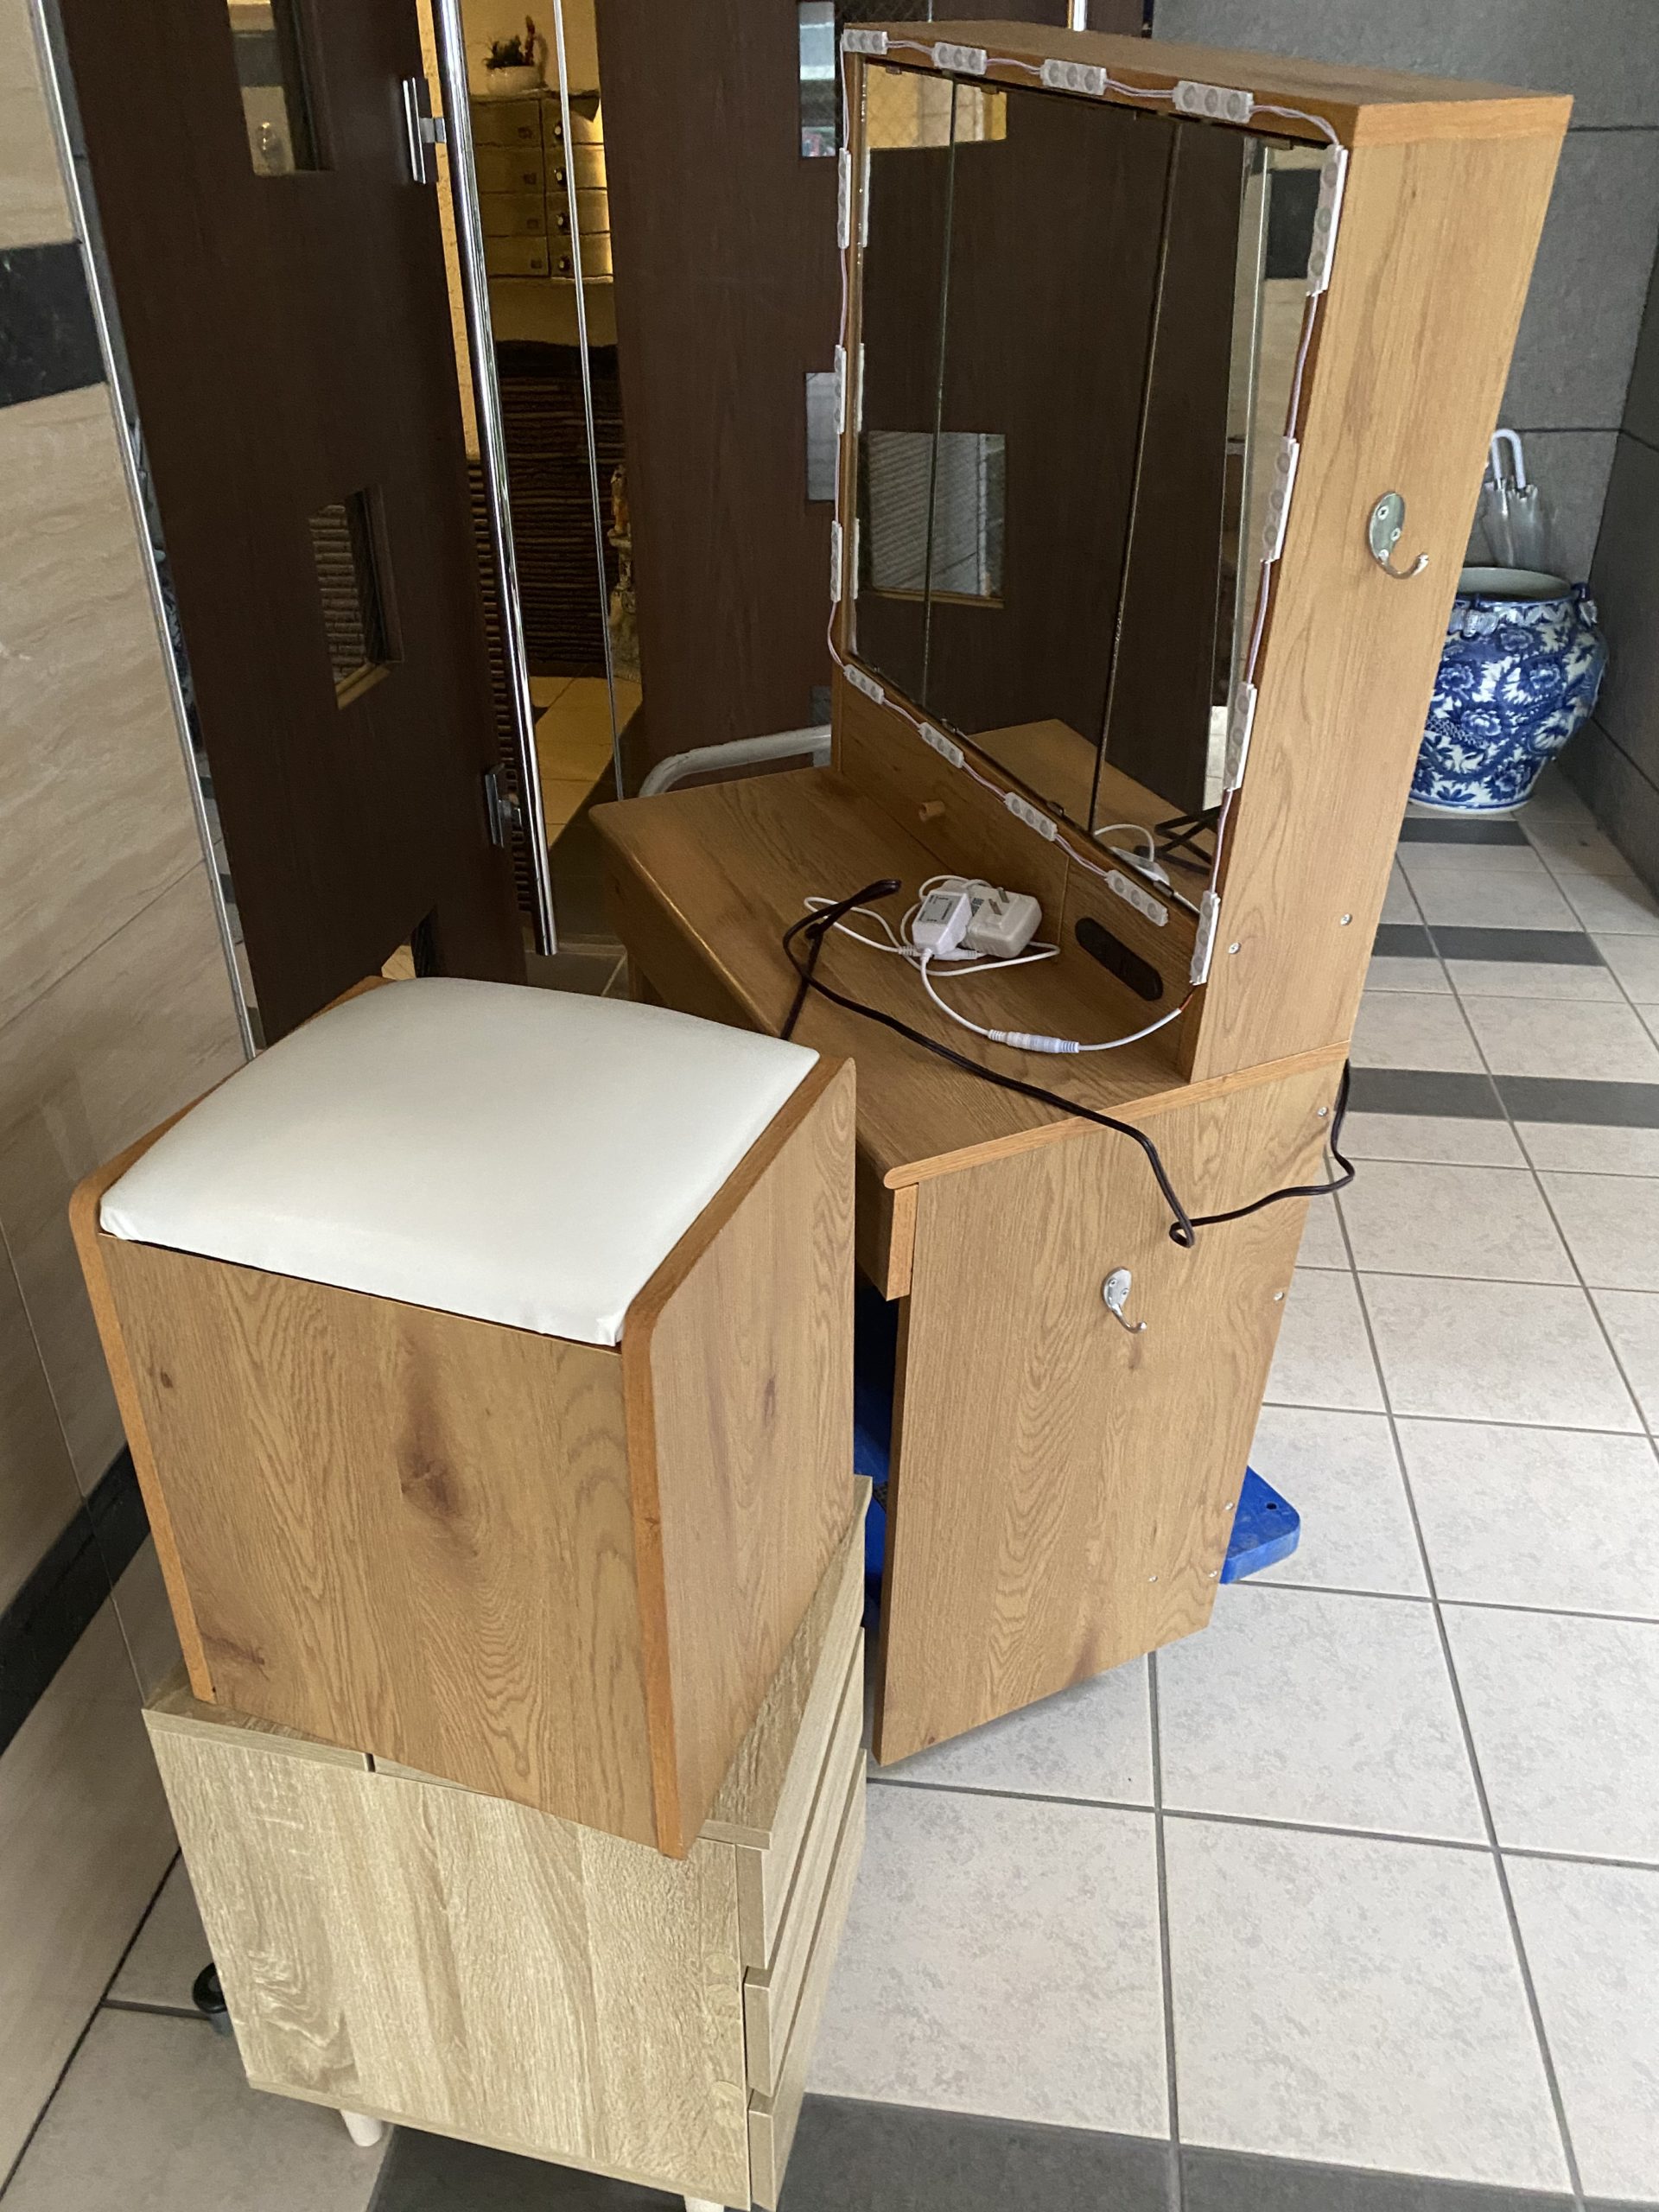 Collection and disposal of dressers and drawers from Koto Ward